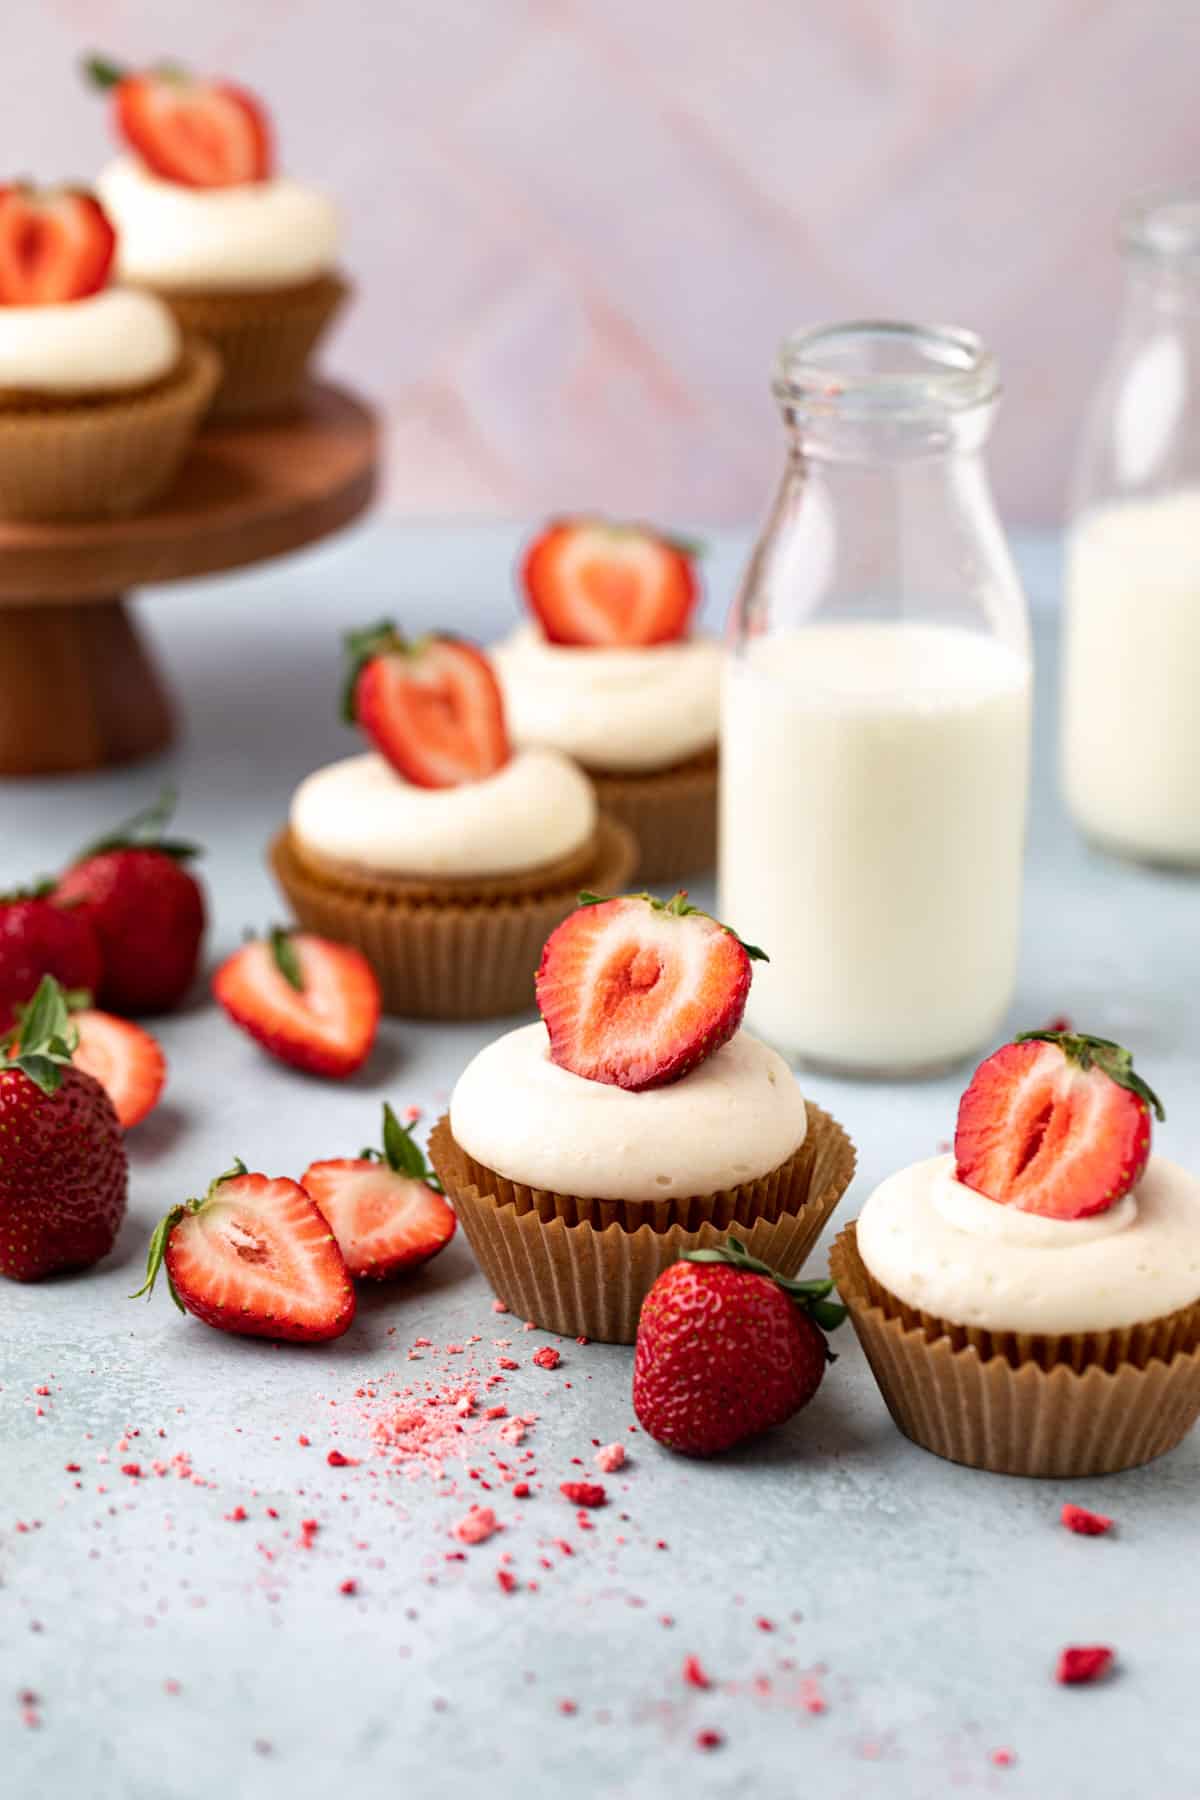 Fresh strawberry and banana cupcakes arranged on a flat surface with a small wood cake stand in the background and two glasses of milk.